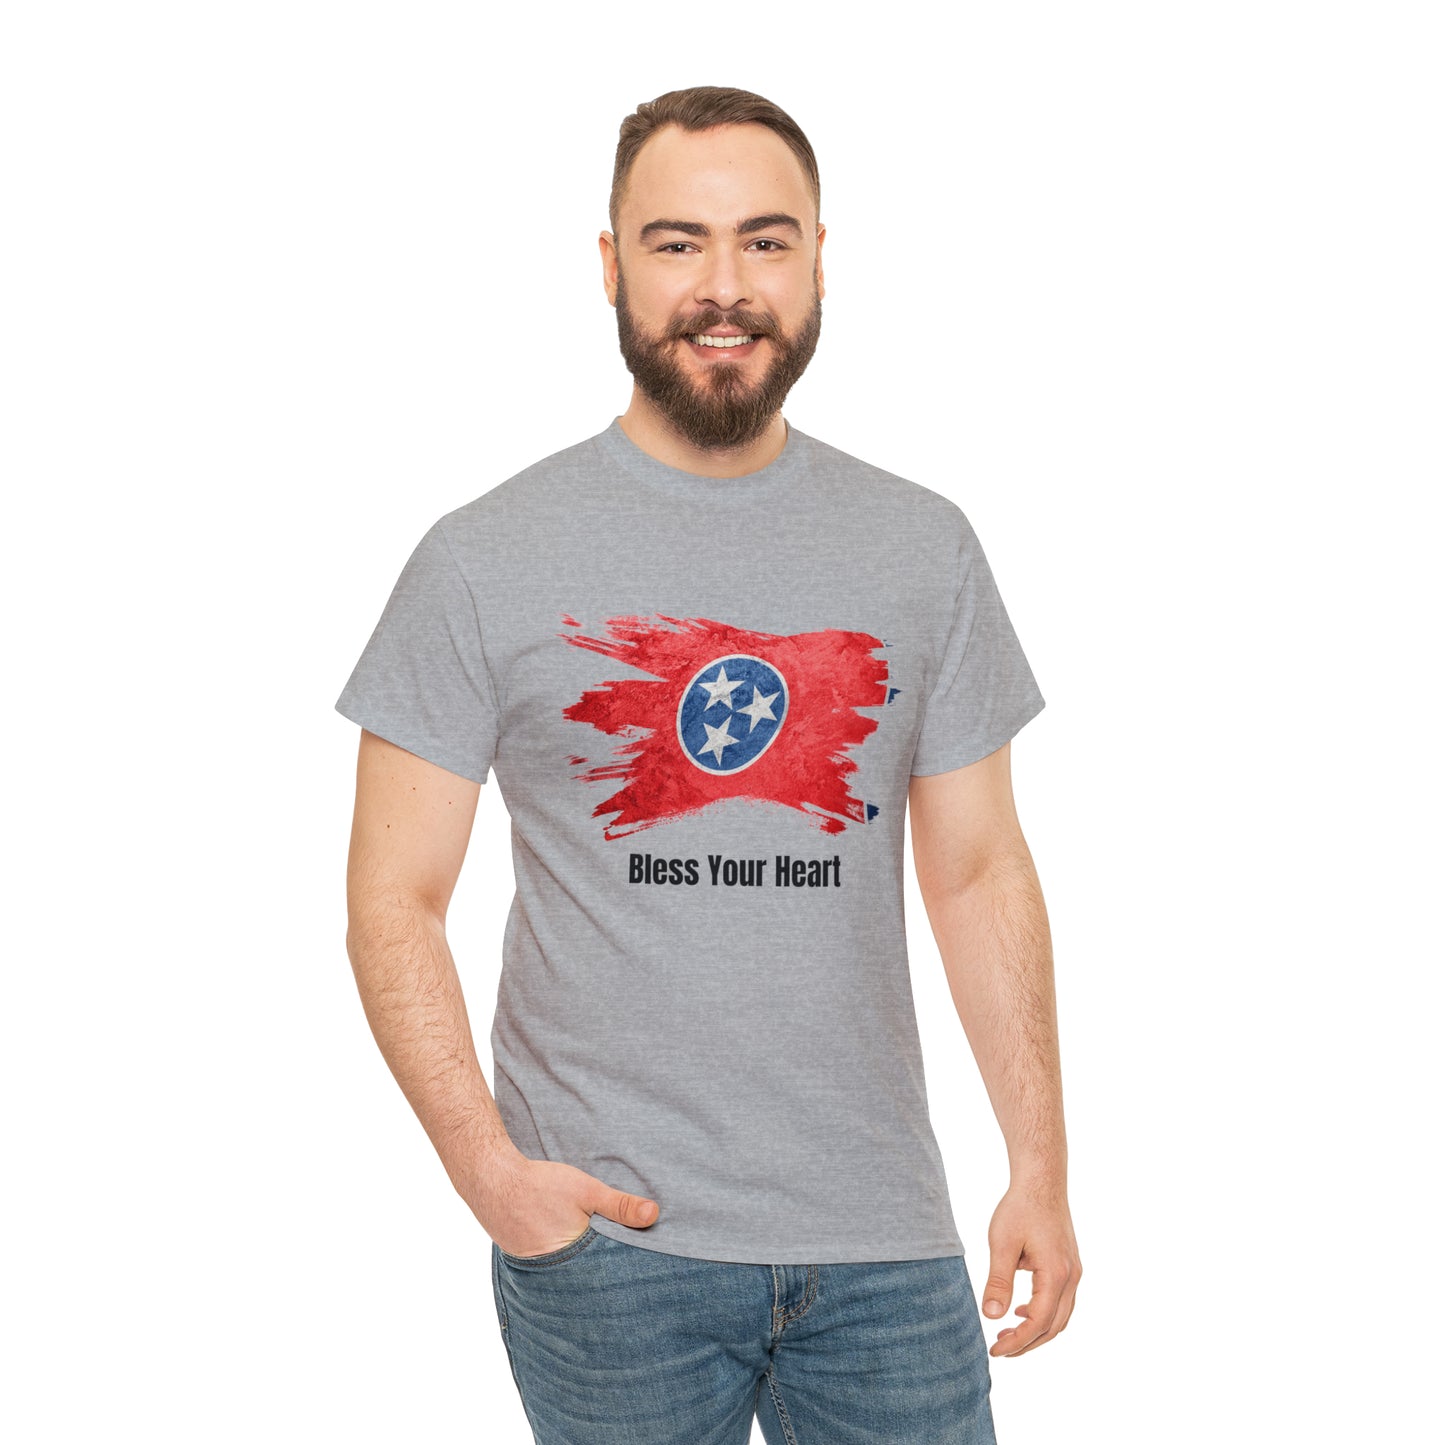 TN Sayings T-Shirt - Bless Your Heart